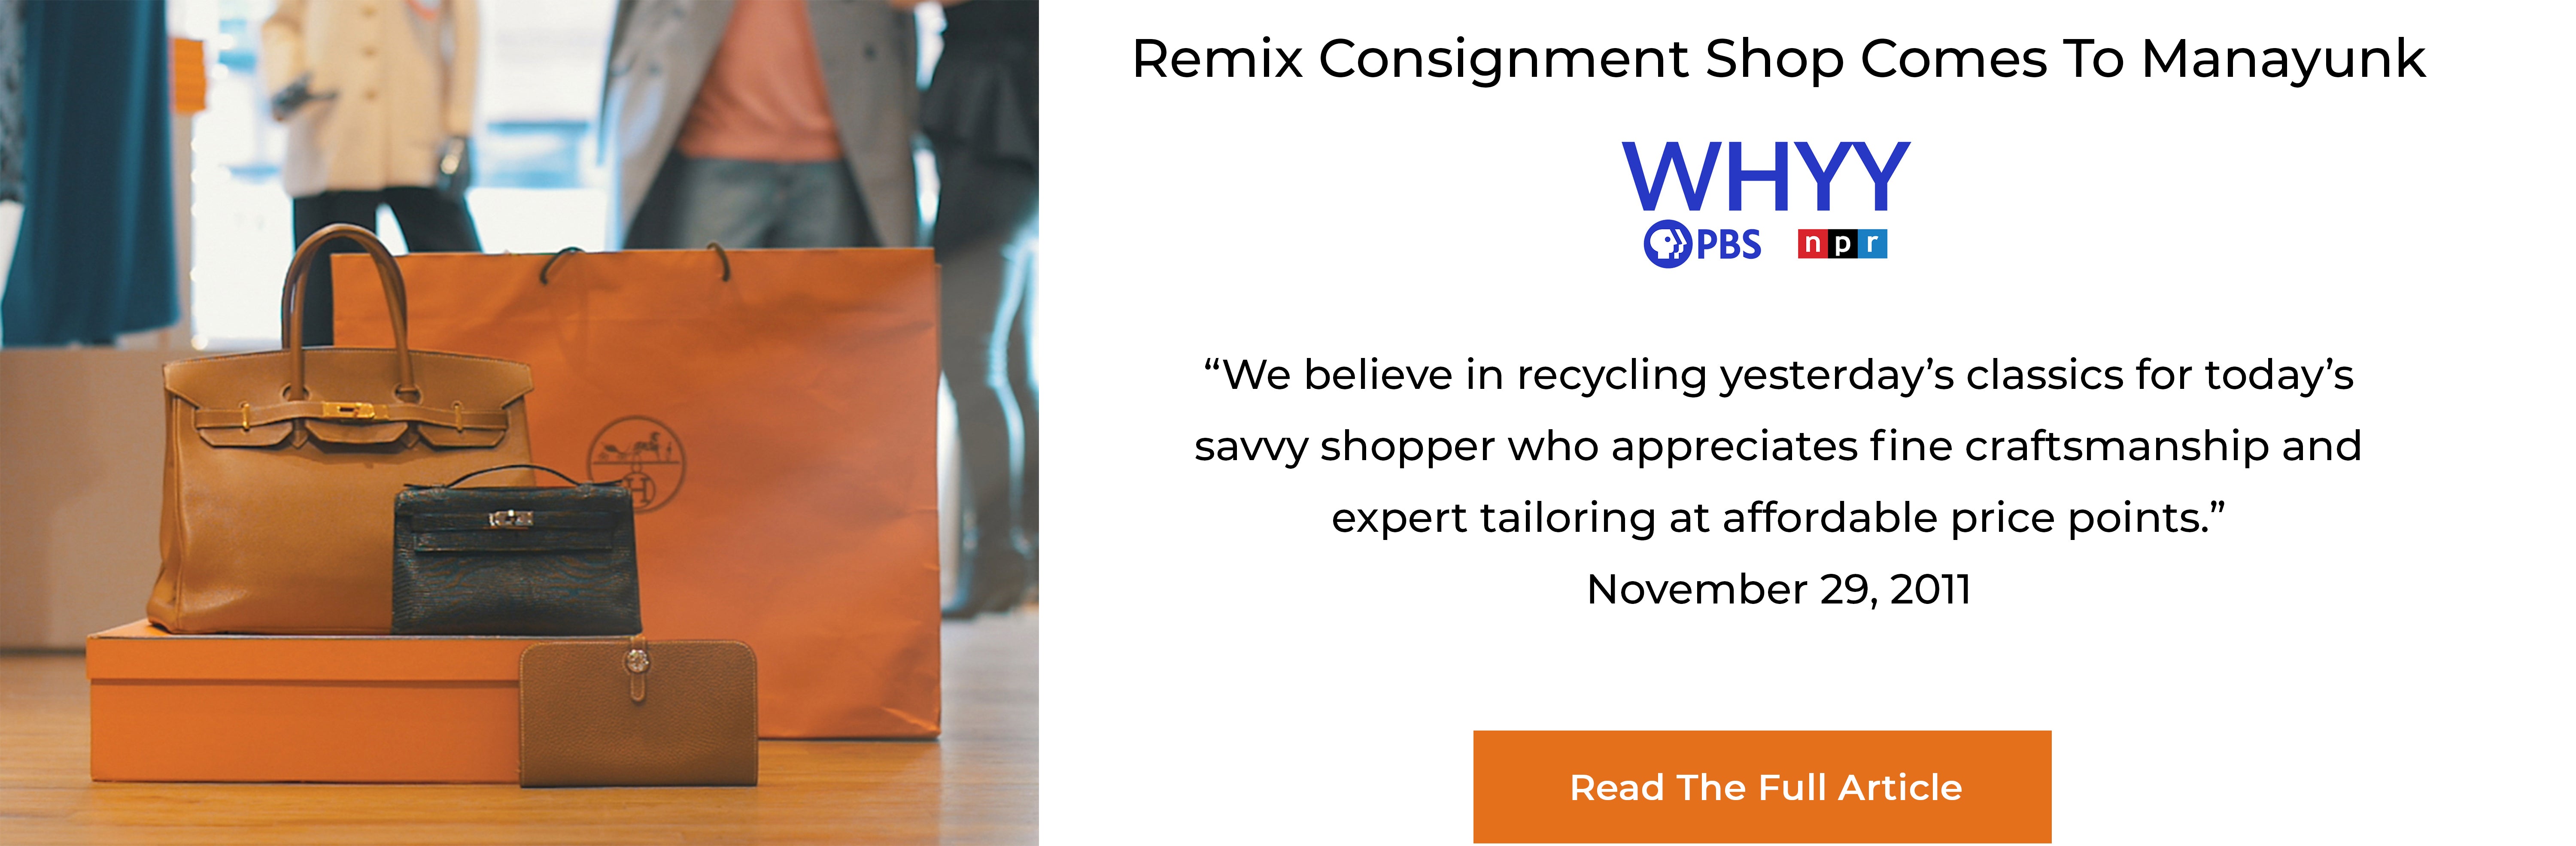 Remix Consigmnent Boutique WHYY Article